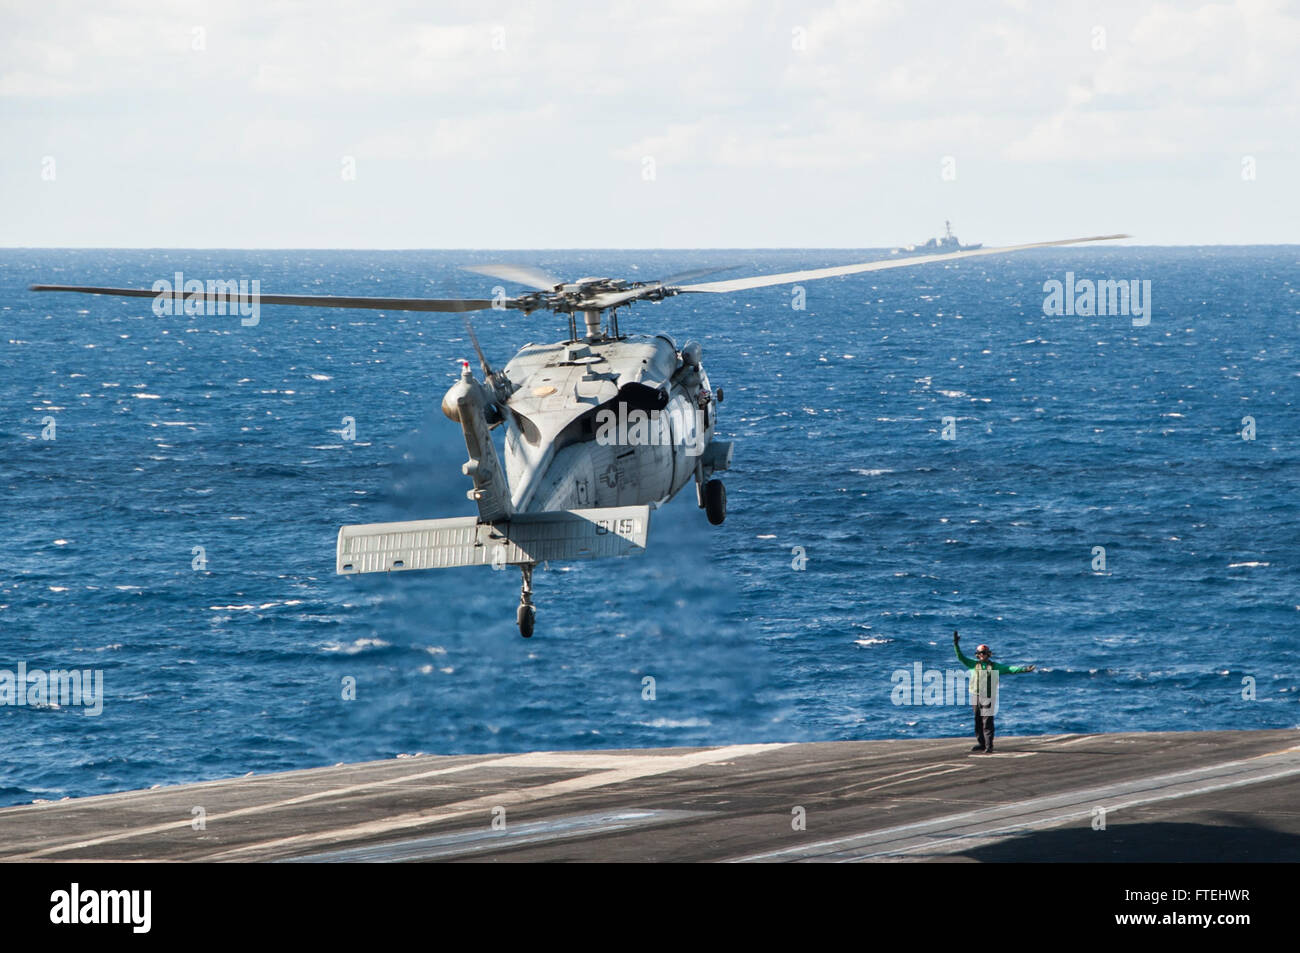 MEDITERRANEAN SEA (Oct. 29, 2014) An MH-60S Sea Hawk, attached to the &quot;Tridents&quot; of Helicopter Sea Combat Squadron (HSC) 9, lands on the flight deck of the aircraft carrier USS George H.W. Bush (CVN 77). George H.W. Bush, homeported in Norfolk, Va., is conducting naval operations in the U.S. 6th Fleet area of operations in support of U.S. national security interests in Europe. Stock Photo